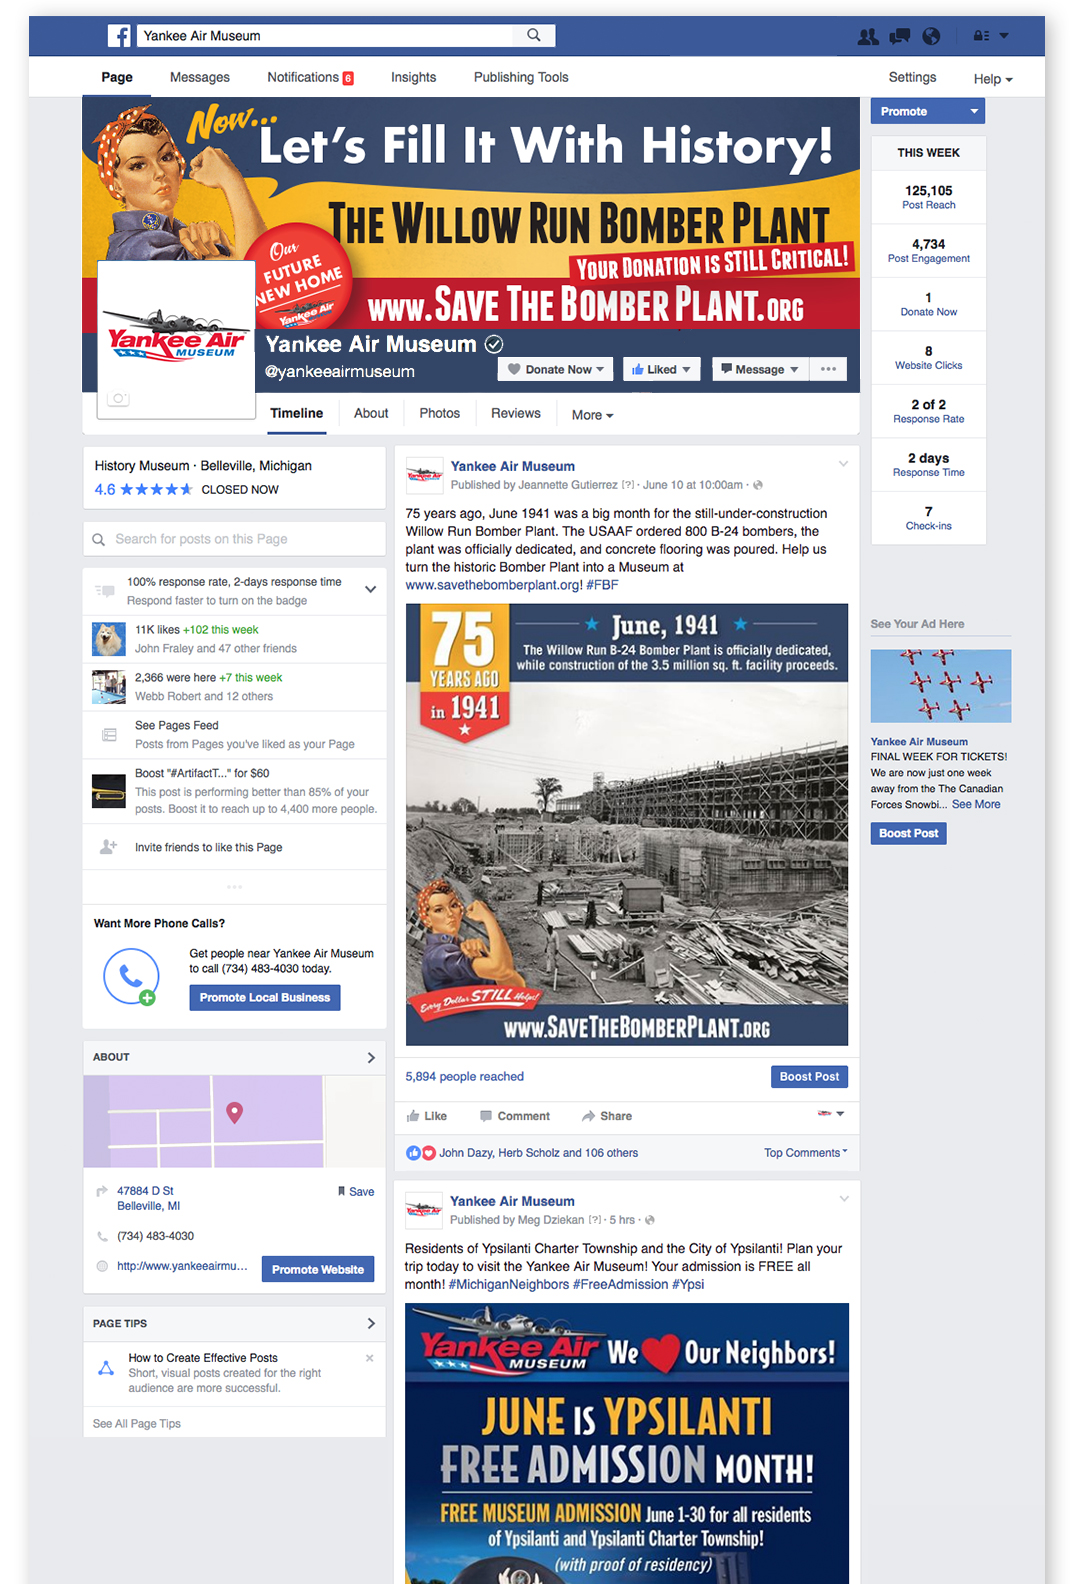 Save The Bomber Plant Facebook